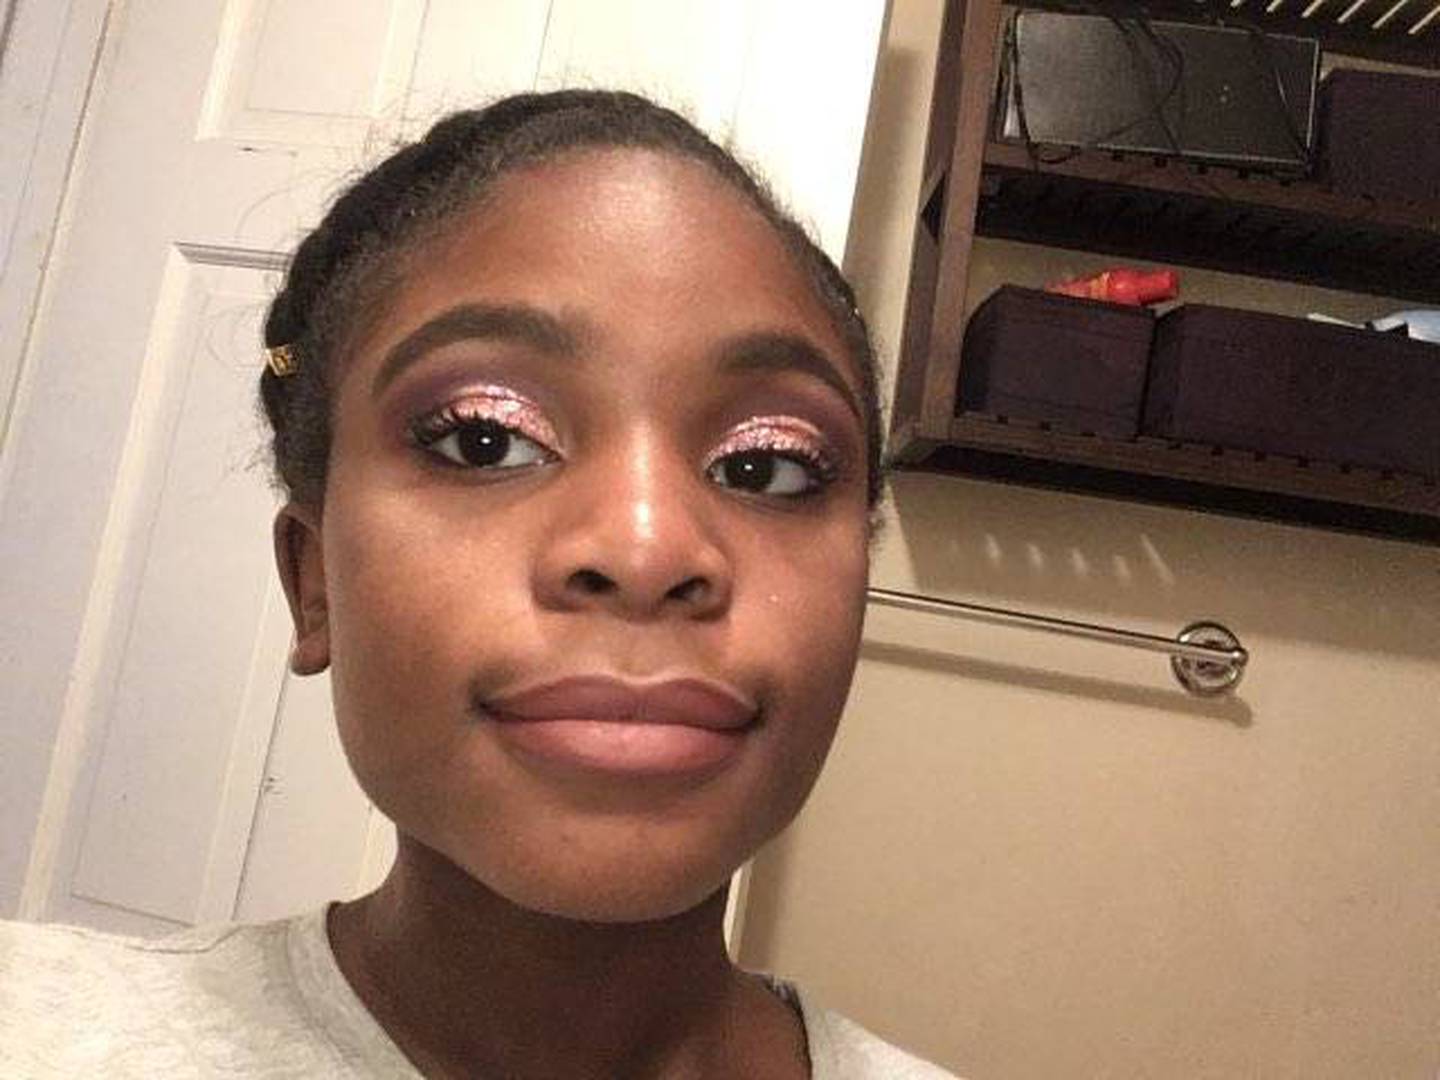 Dykota Morgan, 15, of Bolingbrook was an athlete, artist, activist and scholar. She died of complications from COVID-19 on May 4. Dykota loved makeup and hoped to earn money in high school and college as a makeup artist.